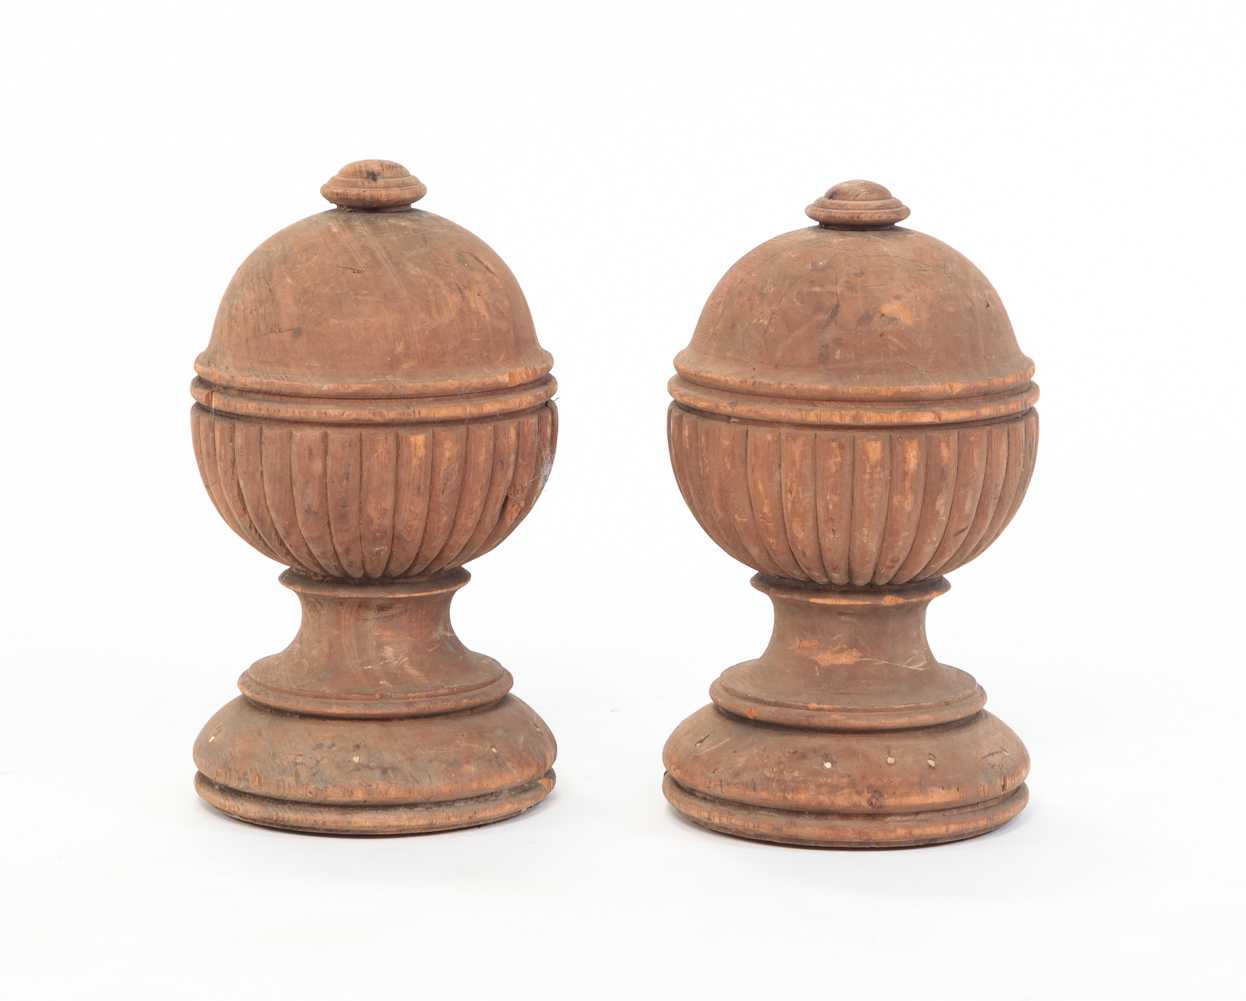 PAIR OF WOODEN ARCHITECTURAL FINIALS.